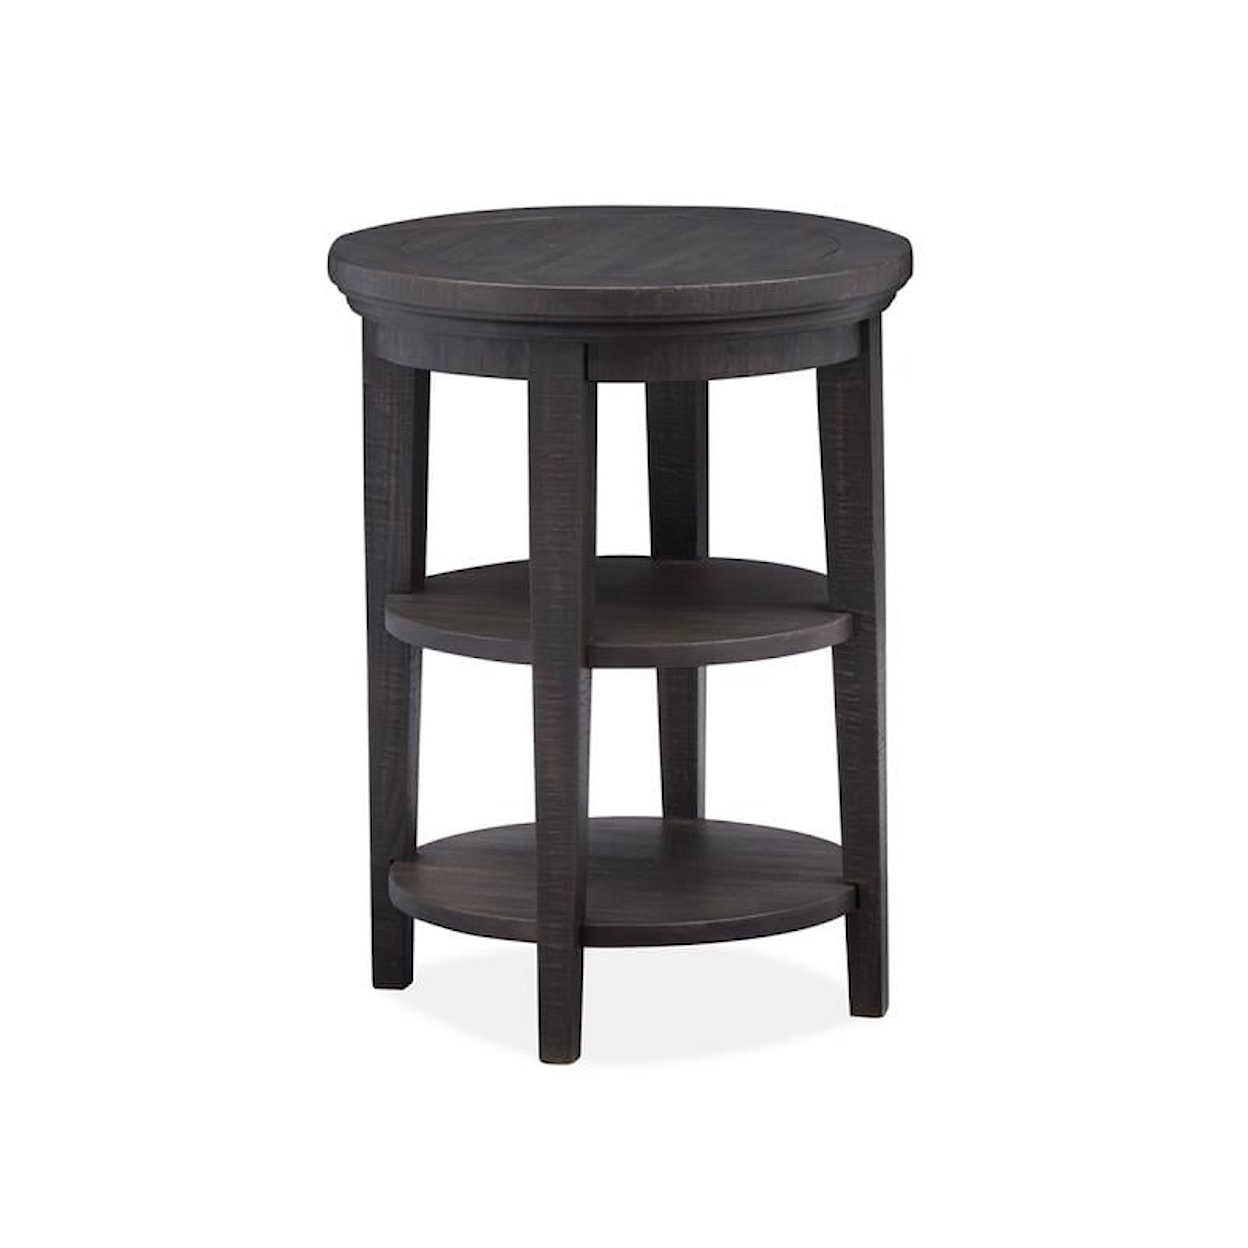 Magnussen Home Westley Falls Occasional Tables Round Accent End Table